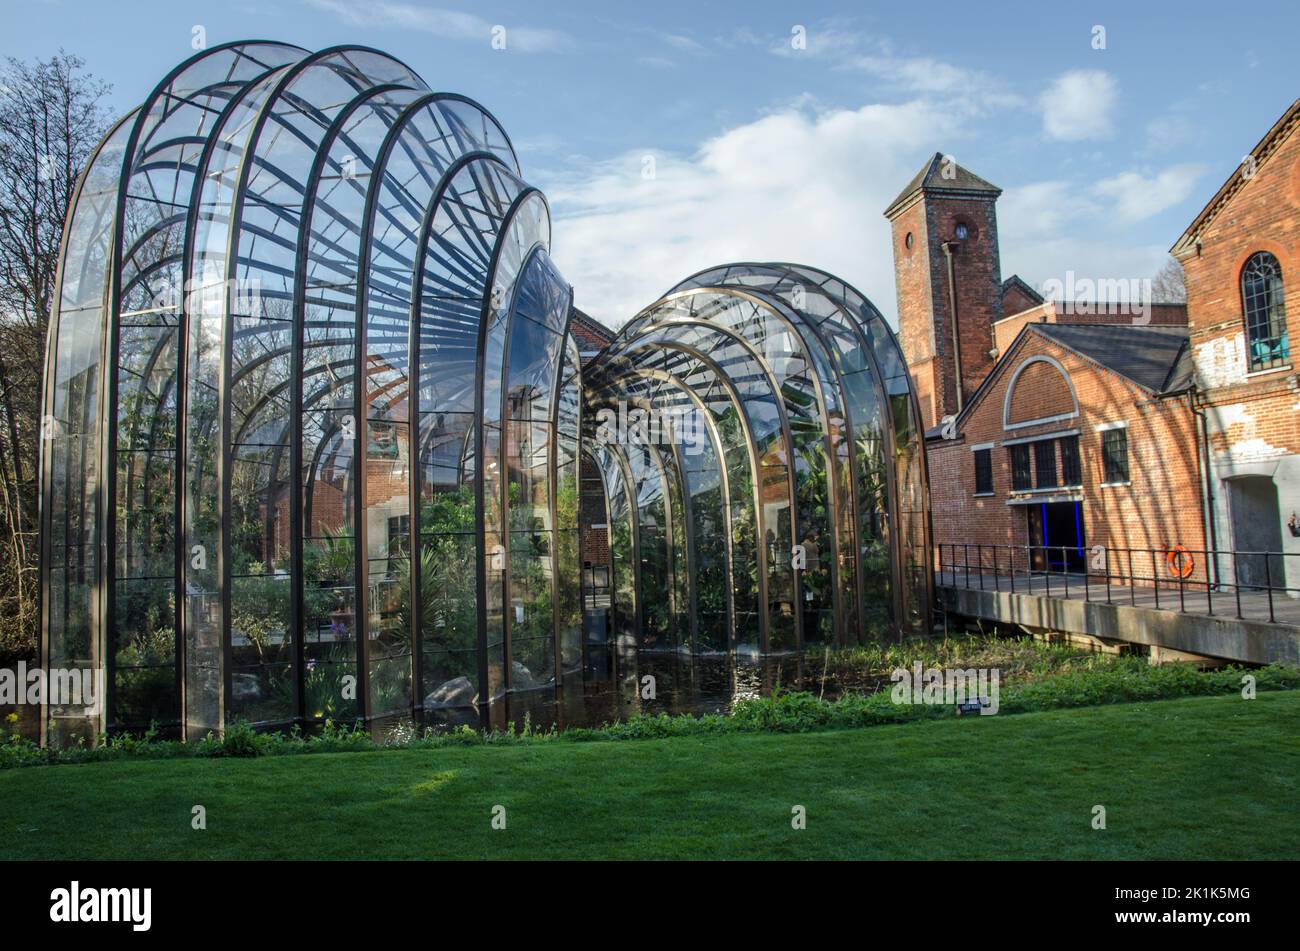 The elegant glass and bronze greenhouse designed by Thomas Hetherwick as part of the visitor experience at the Bombay Sapphire Gin Distillery at Laver Stock Photo